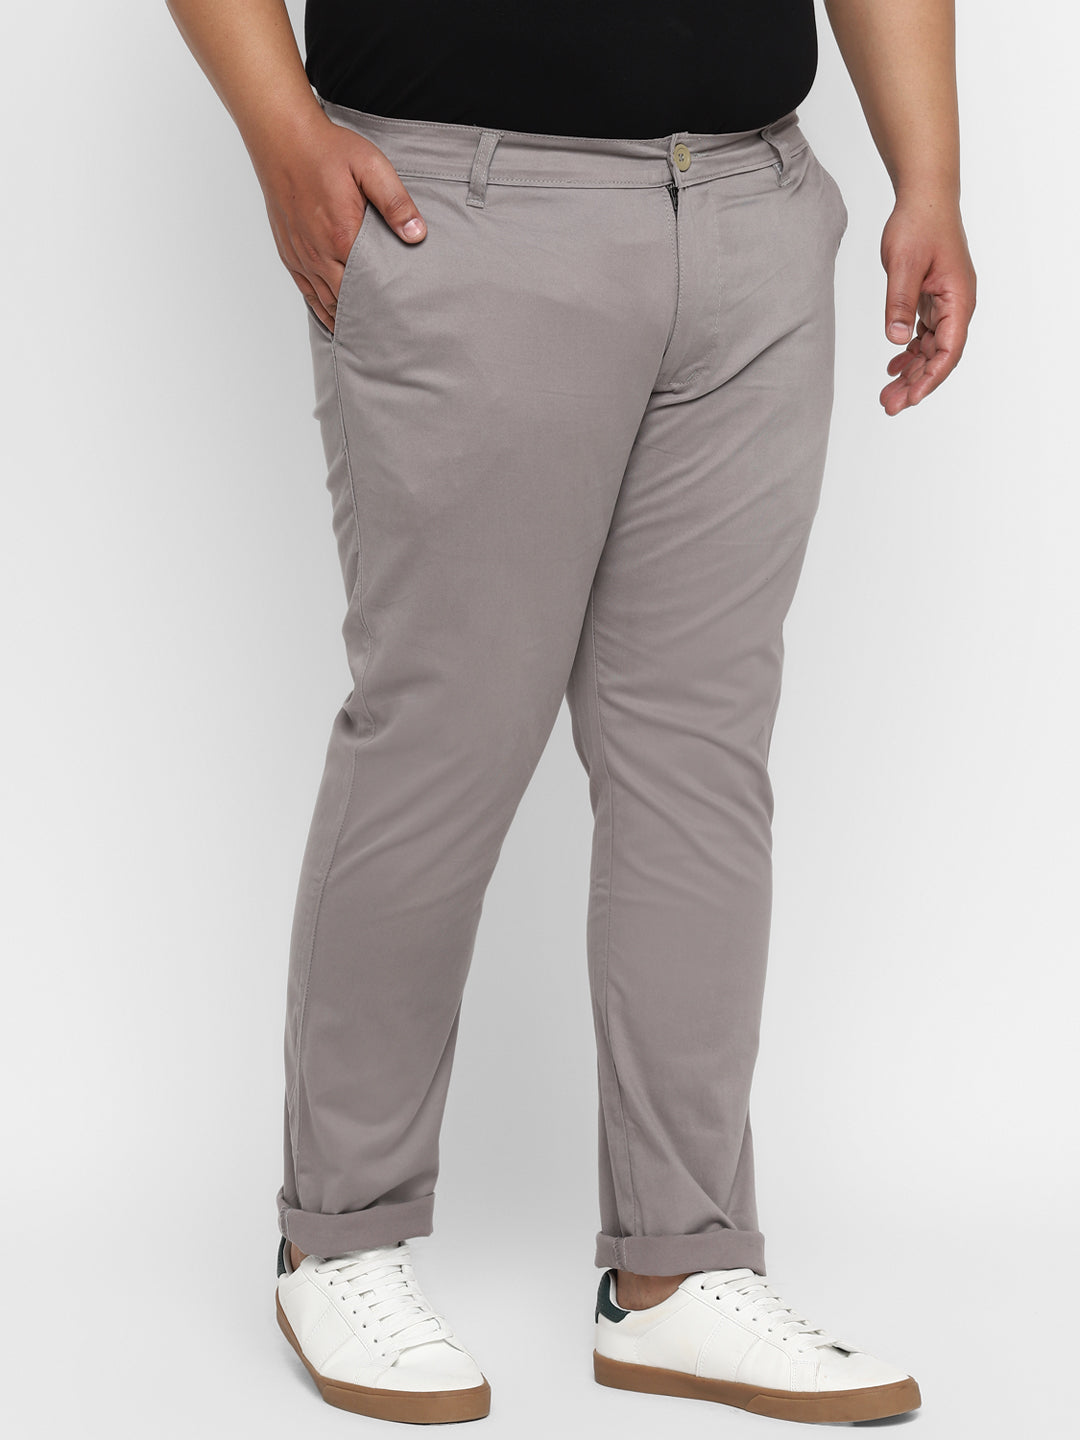 Plus Men's Grey Cotton Regular Fit Casual Chinos Trousers Stretch